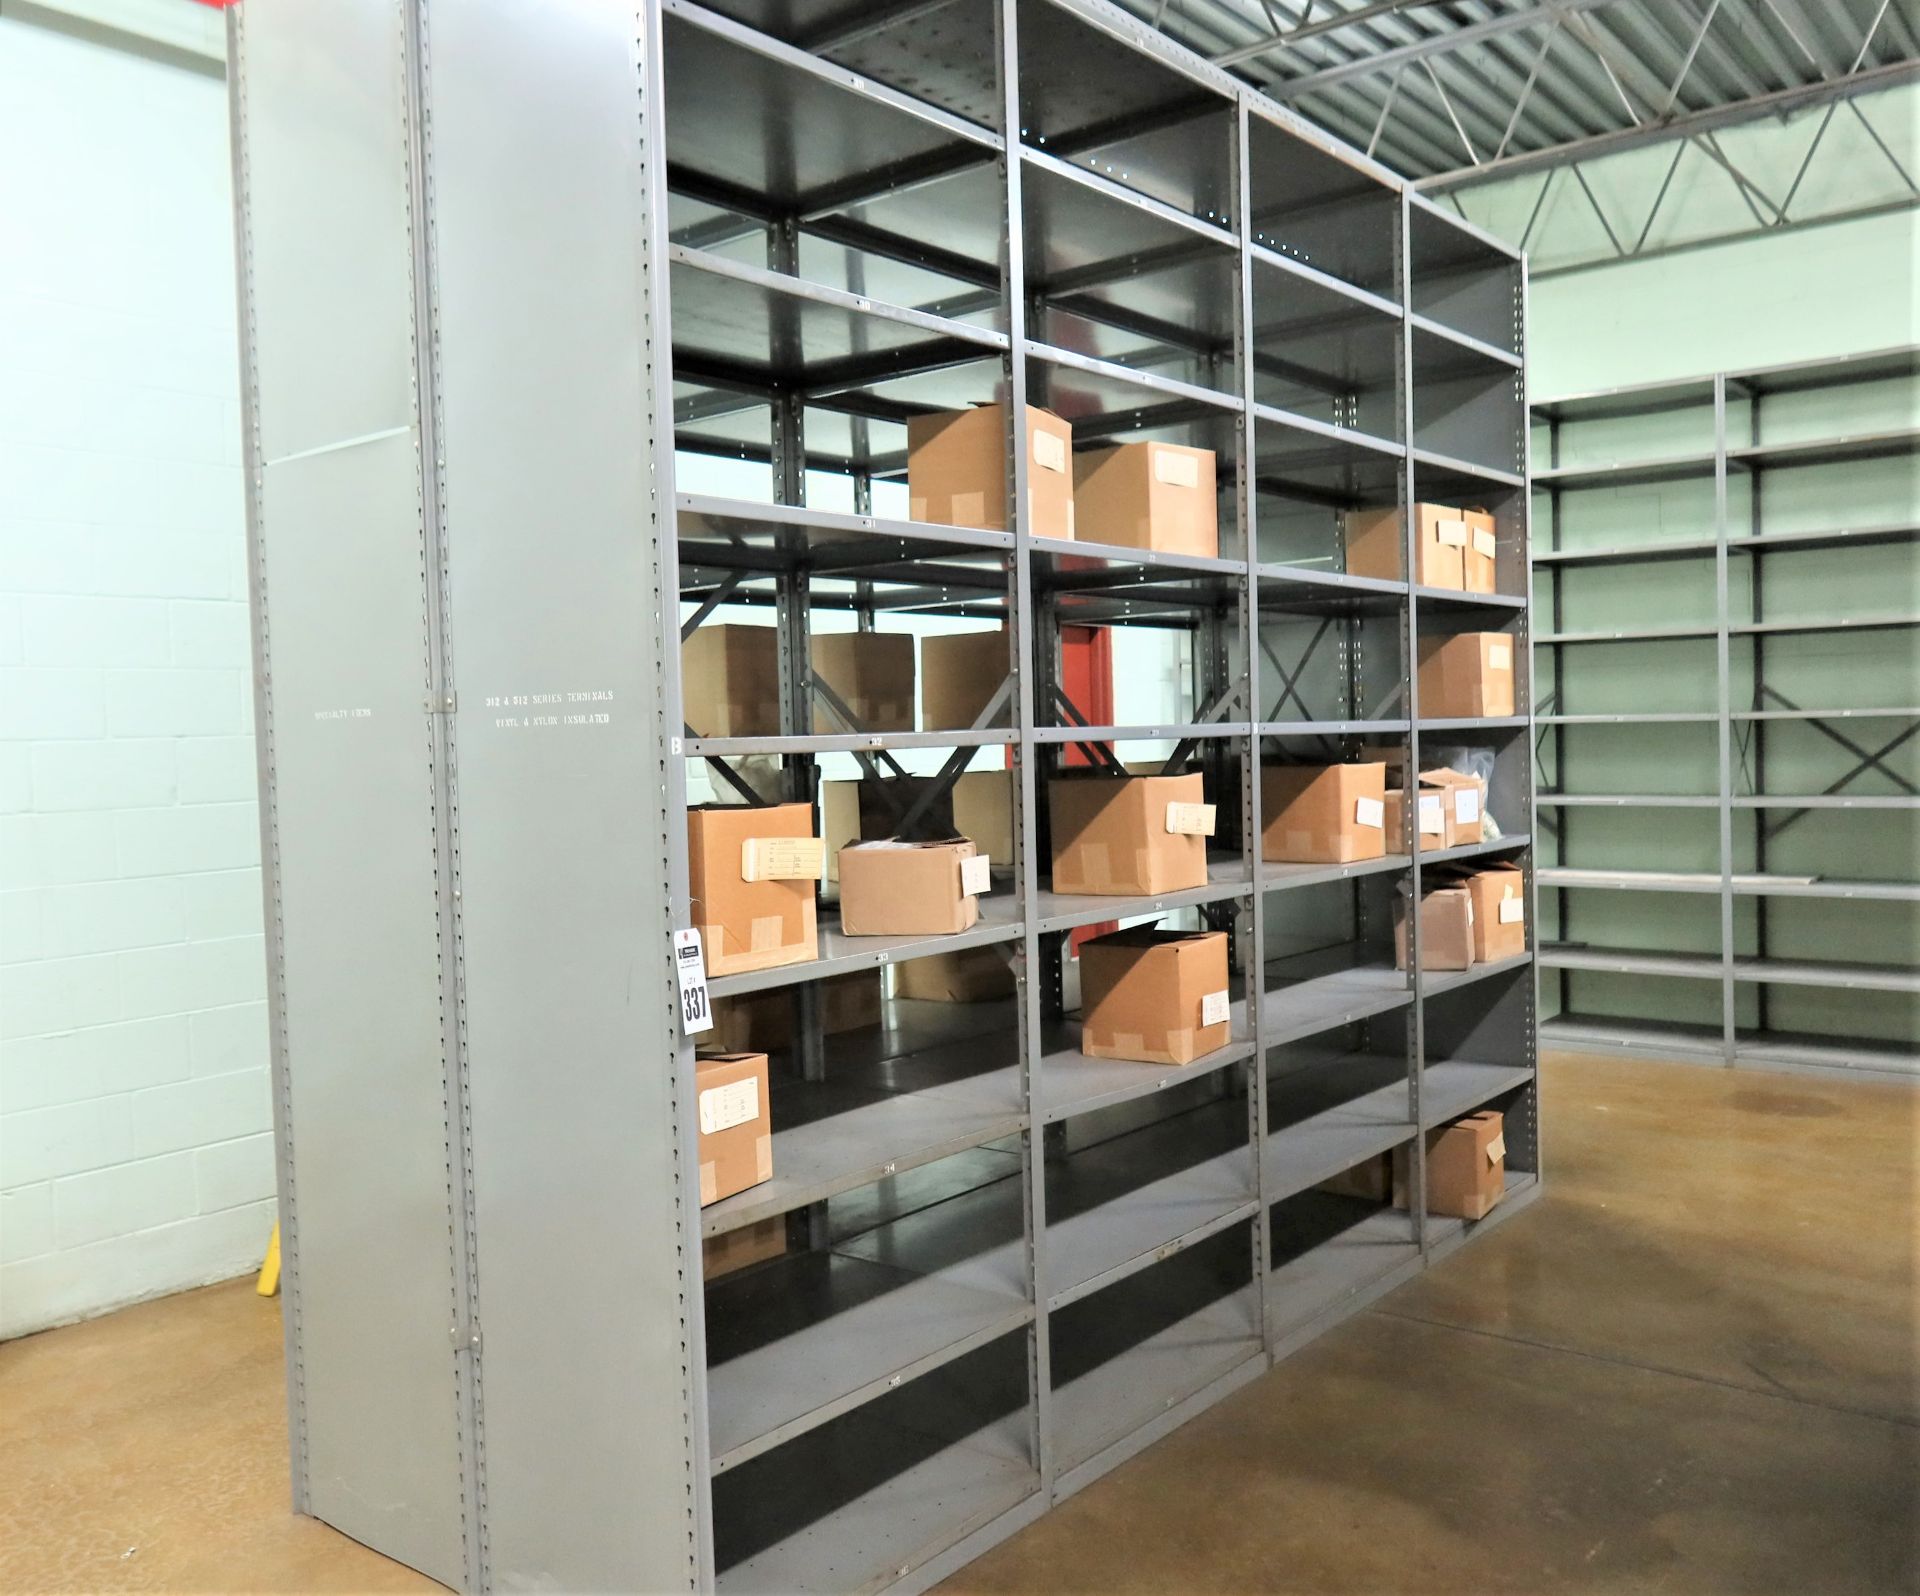 (2) Sections of Shelving